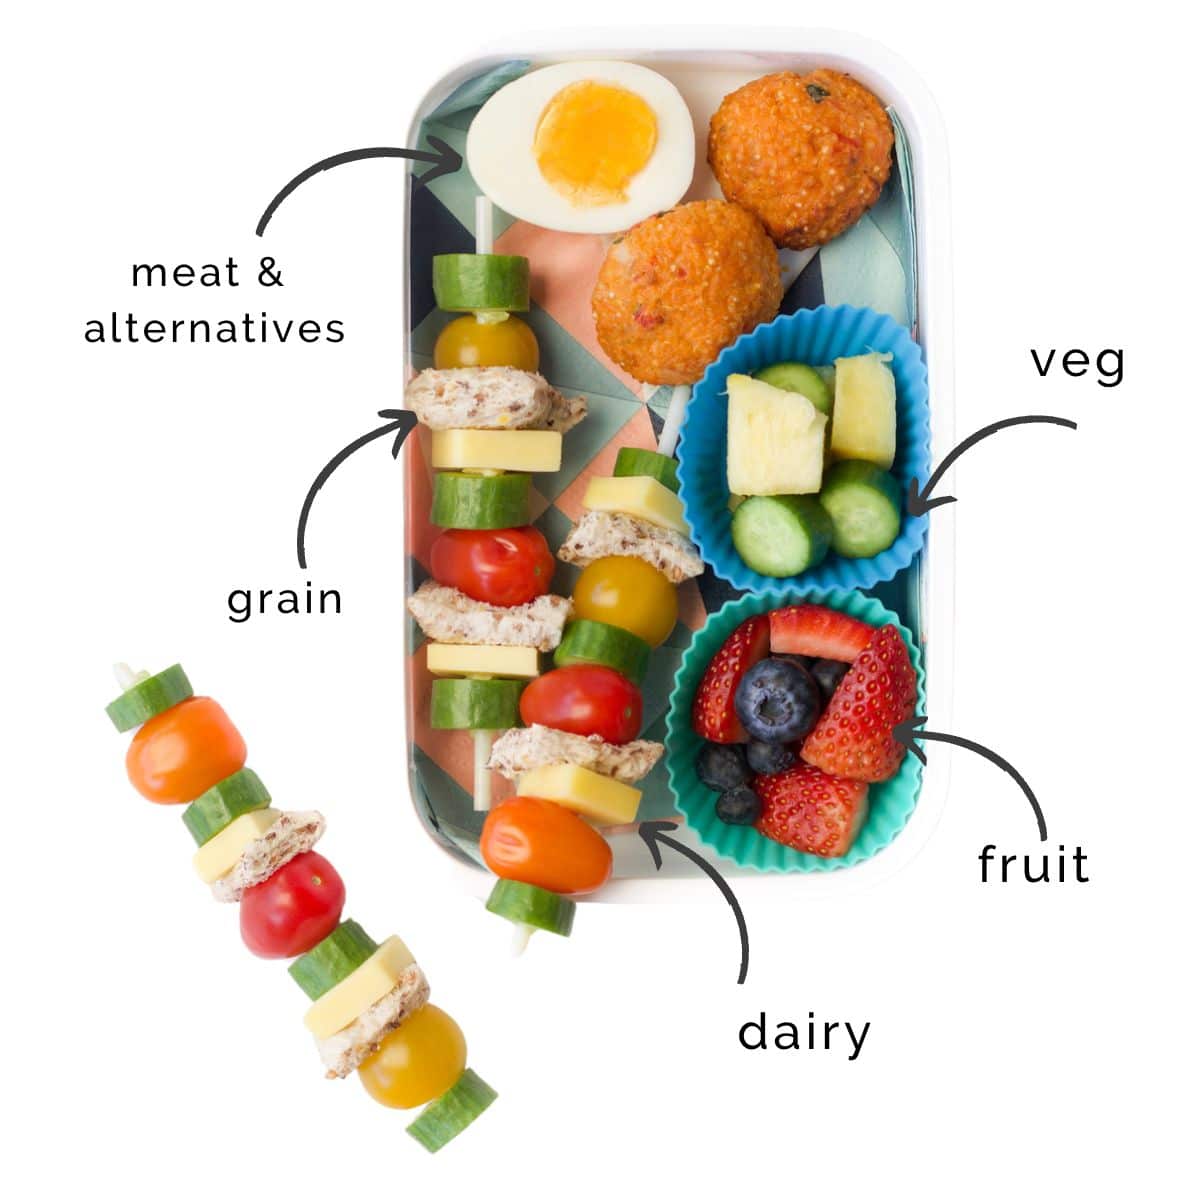 Lunchbox Packed with 3 Sandwich Kebabs, Half an Egg, 2 Quinoa Balls and 2 Silicon Muffin Containers one with  Mixed Berries and the other with Vegetable and Cheese Cubes.